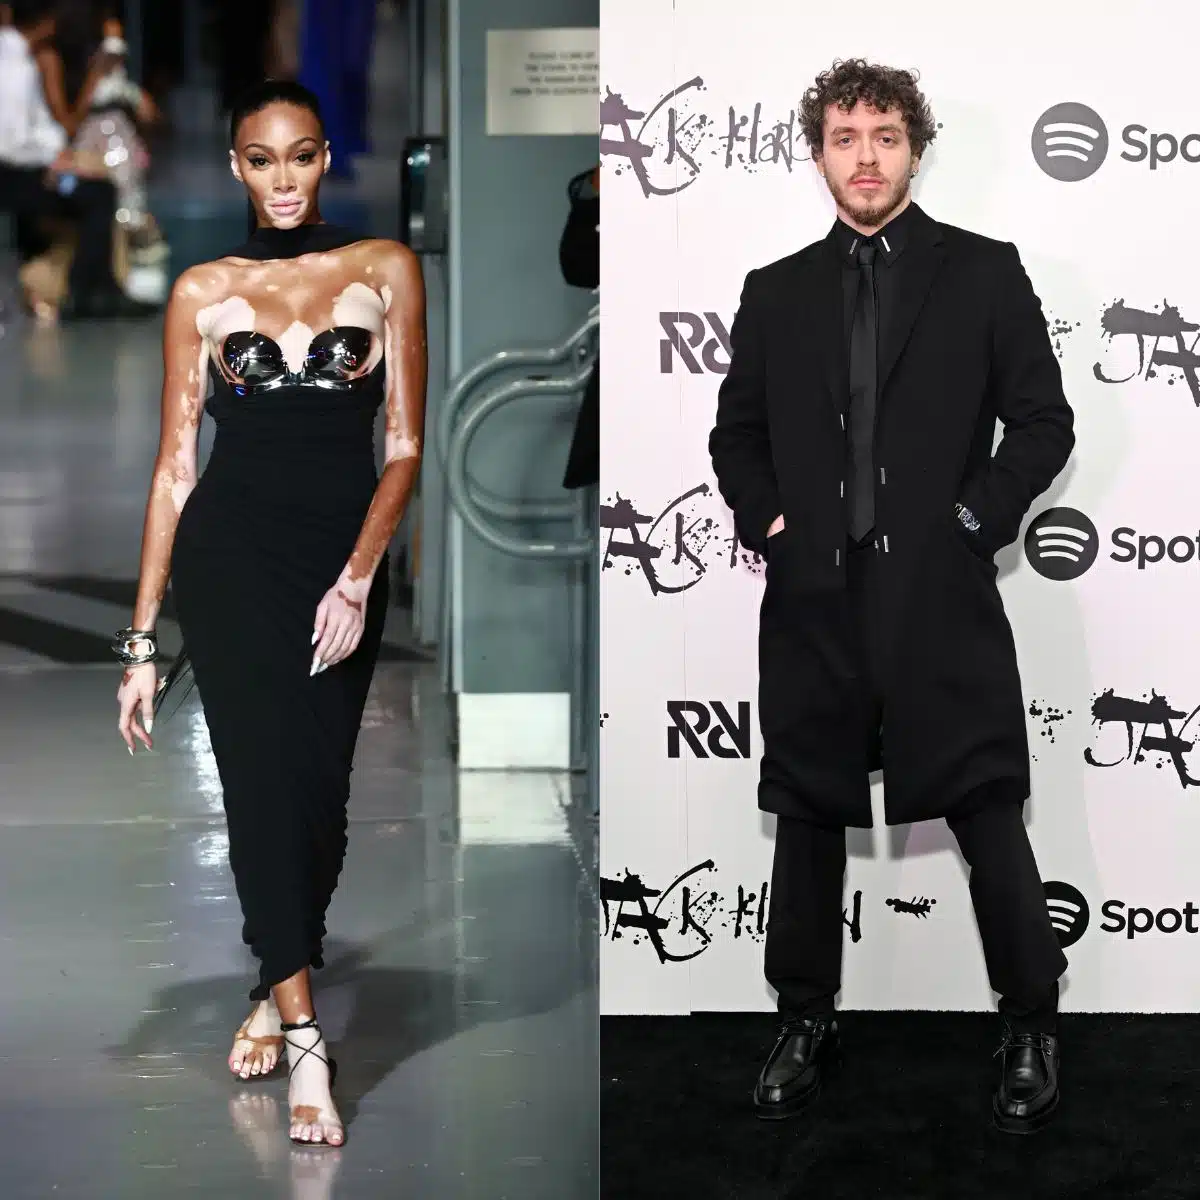 Are Jack Harlow and Winnie Harlow related